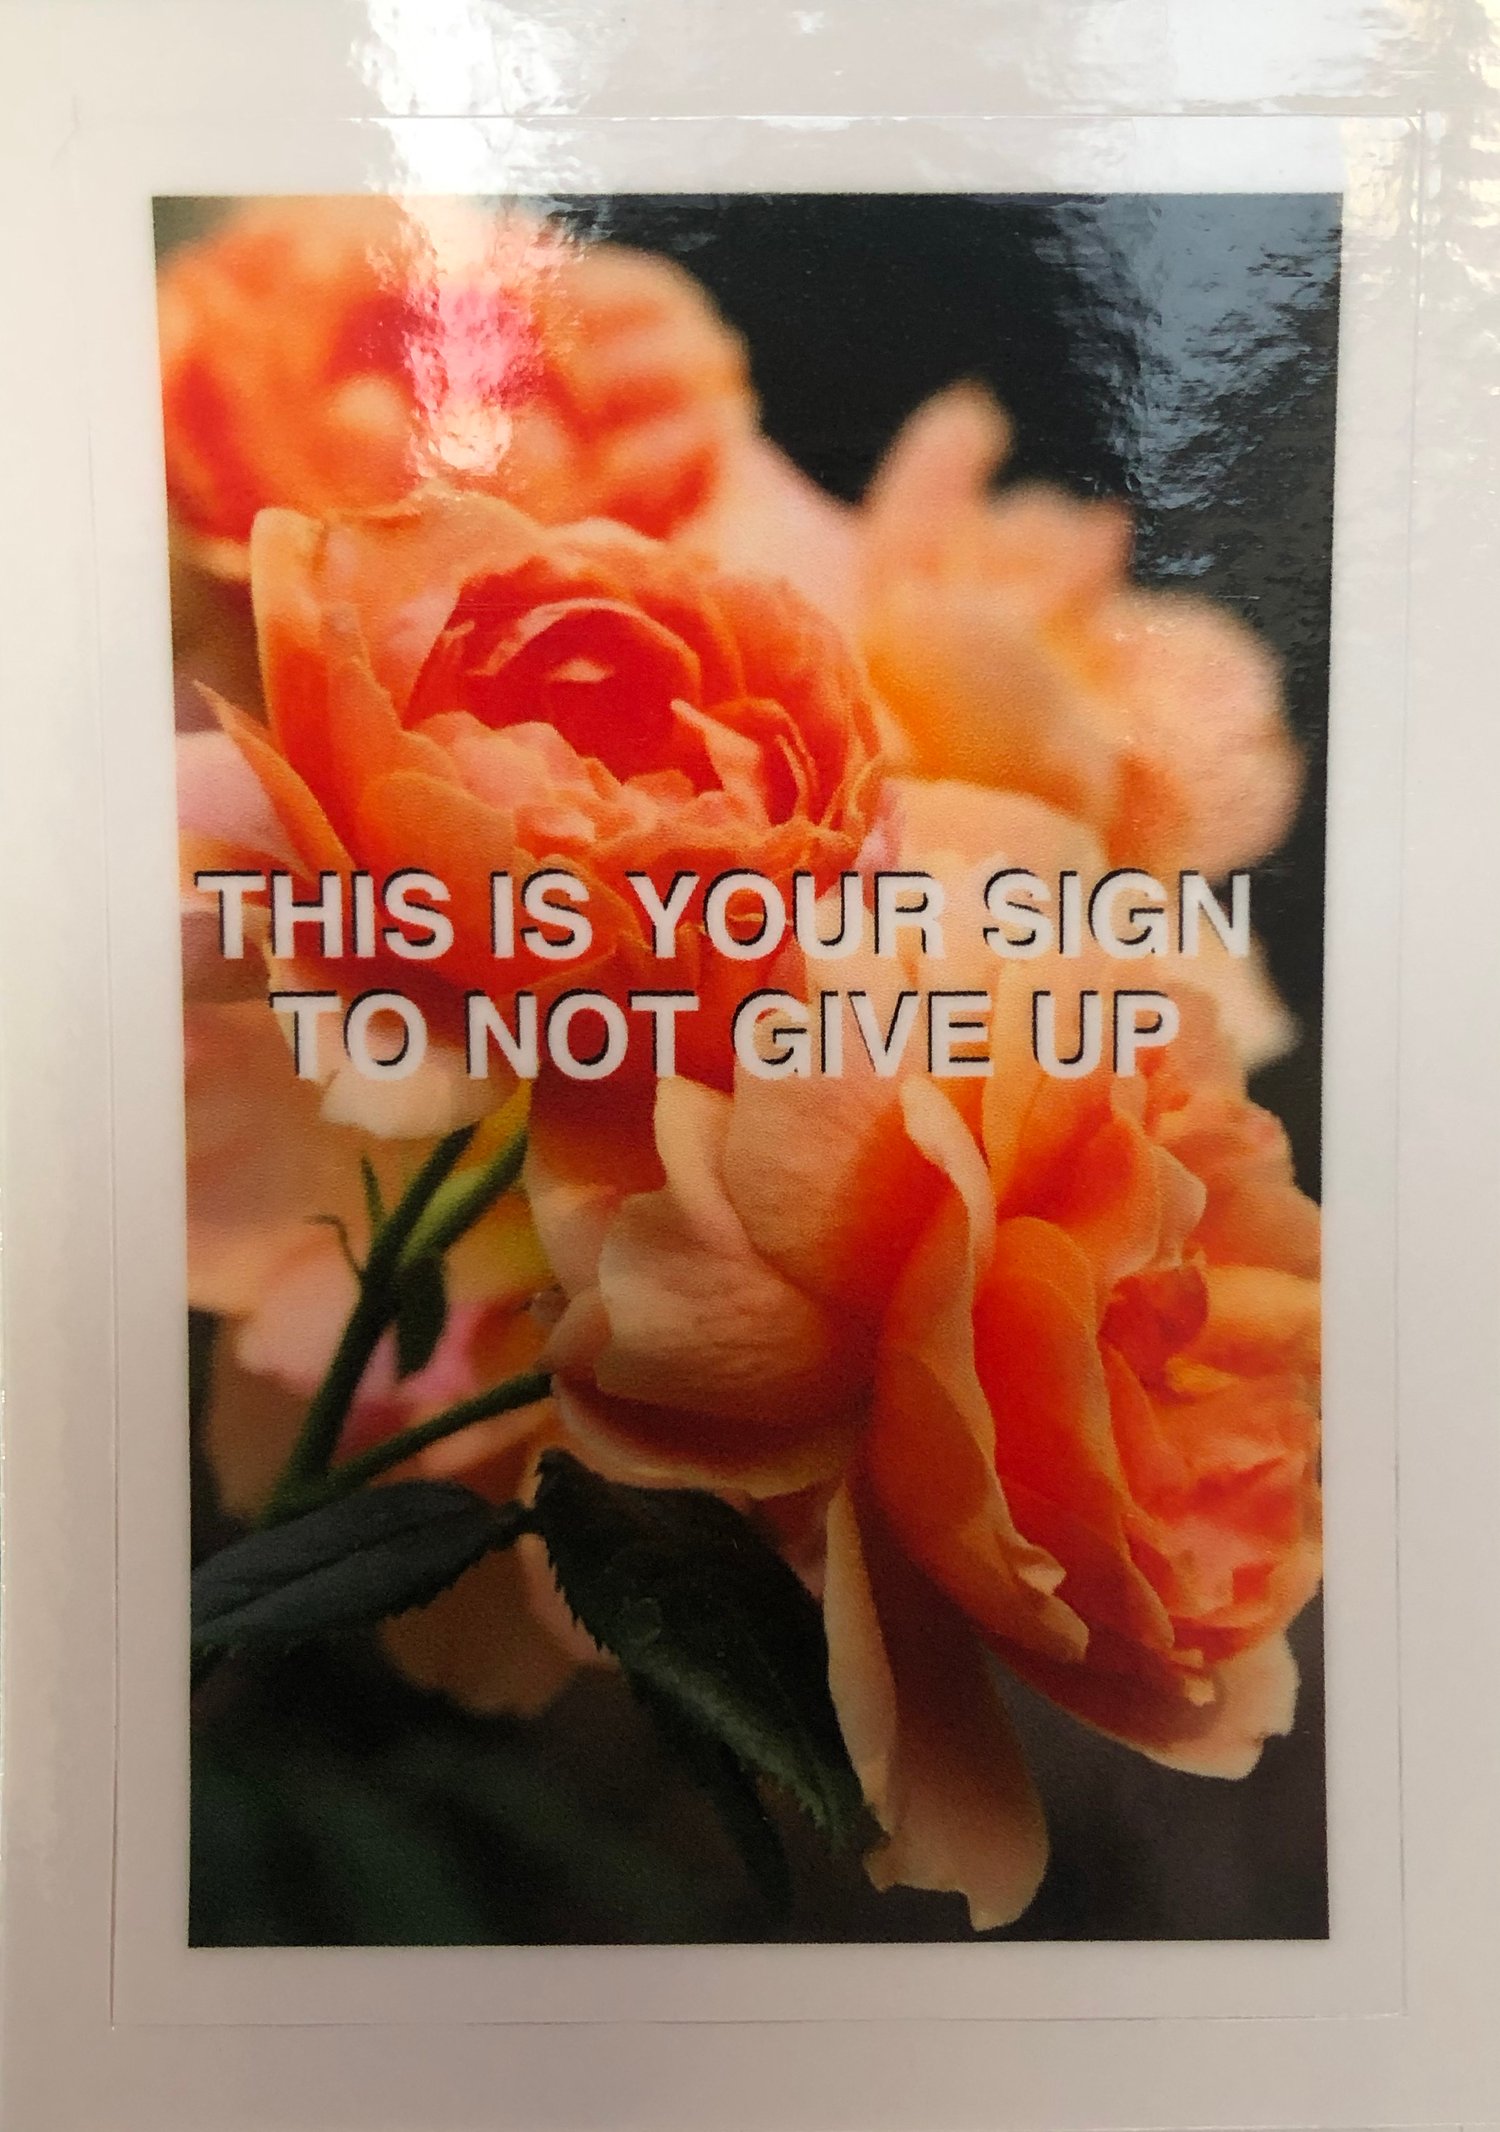 THIS IS YOUR SIGN TO NOT GIVE UP